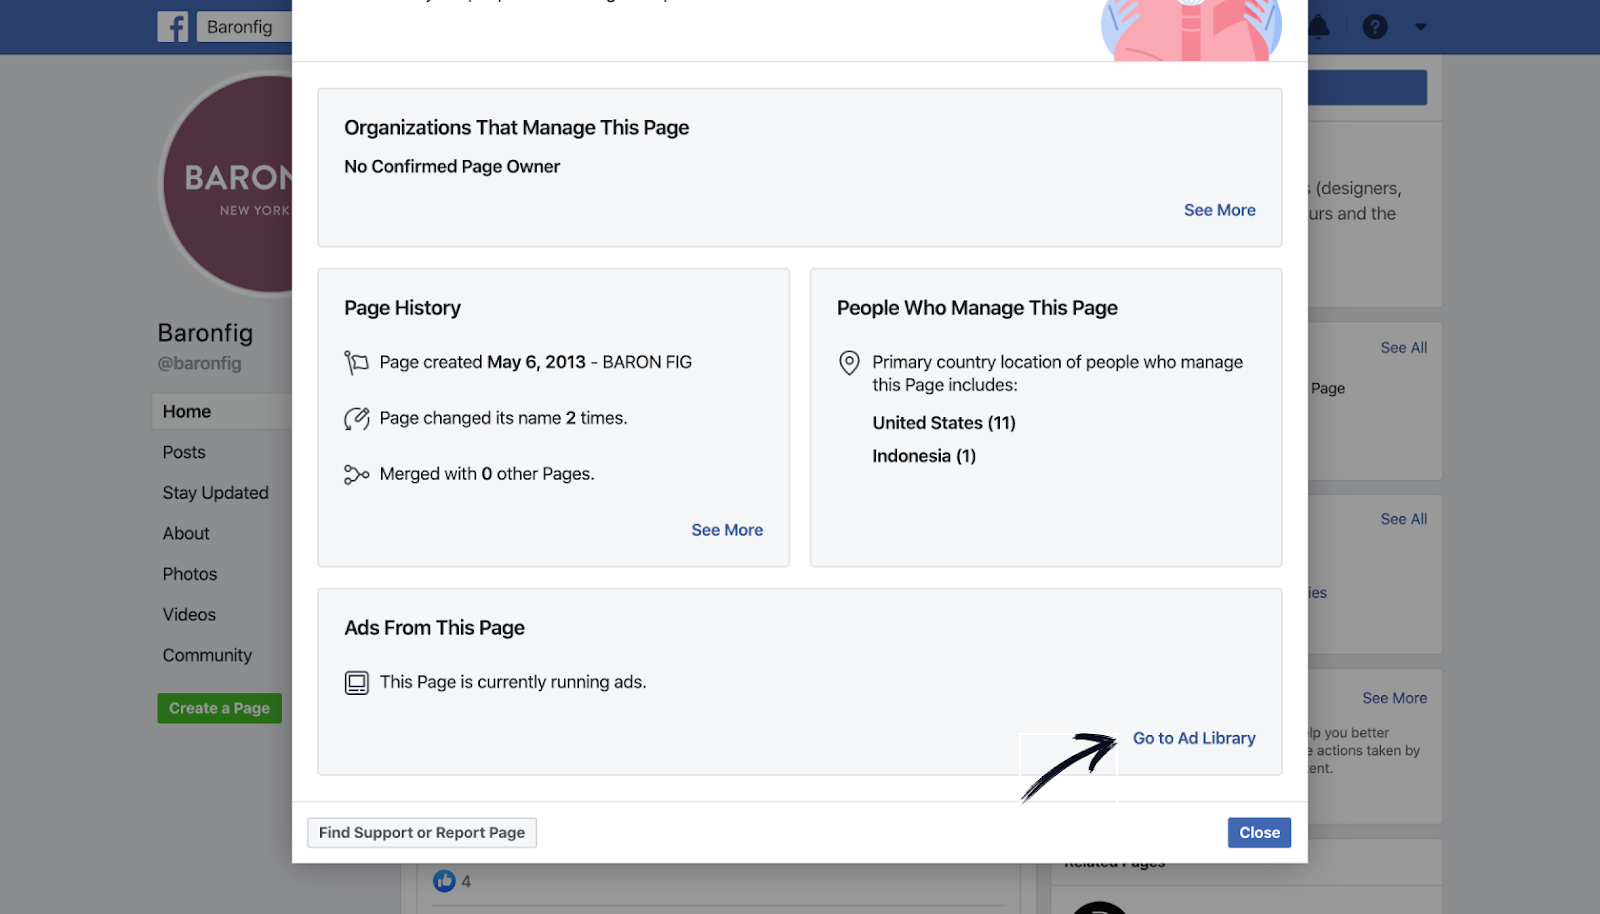 Facebook competitor Page transparency - Ad library